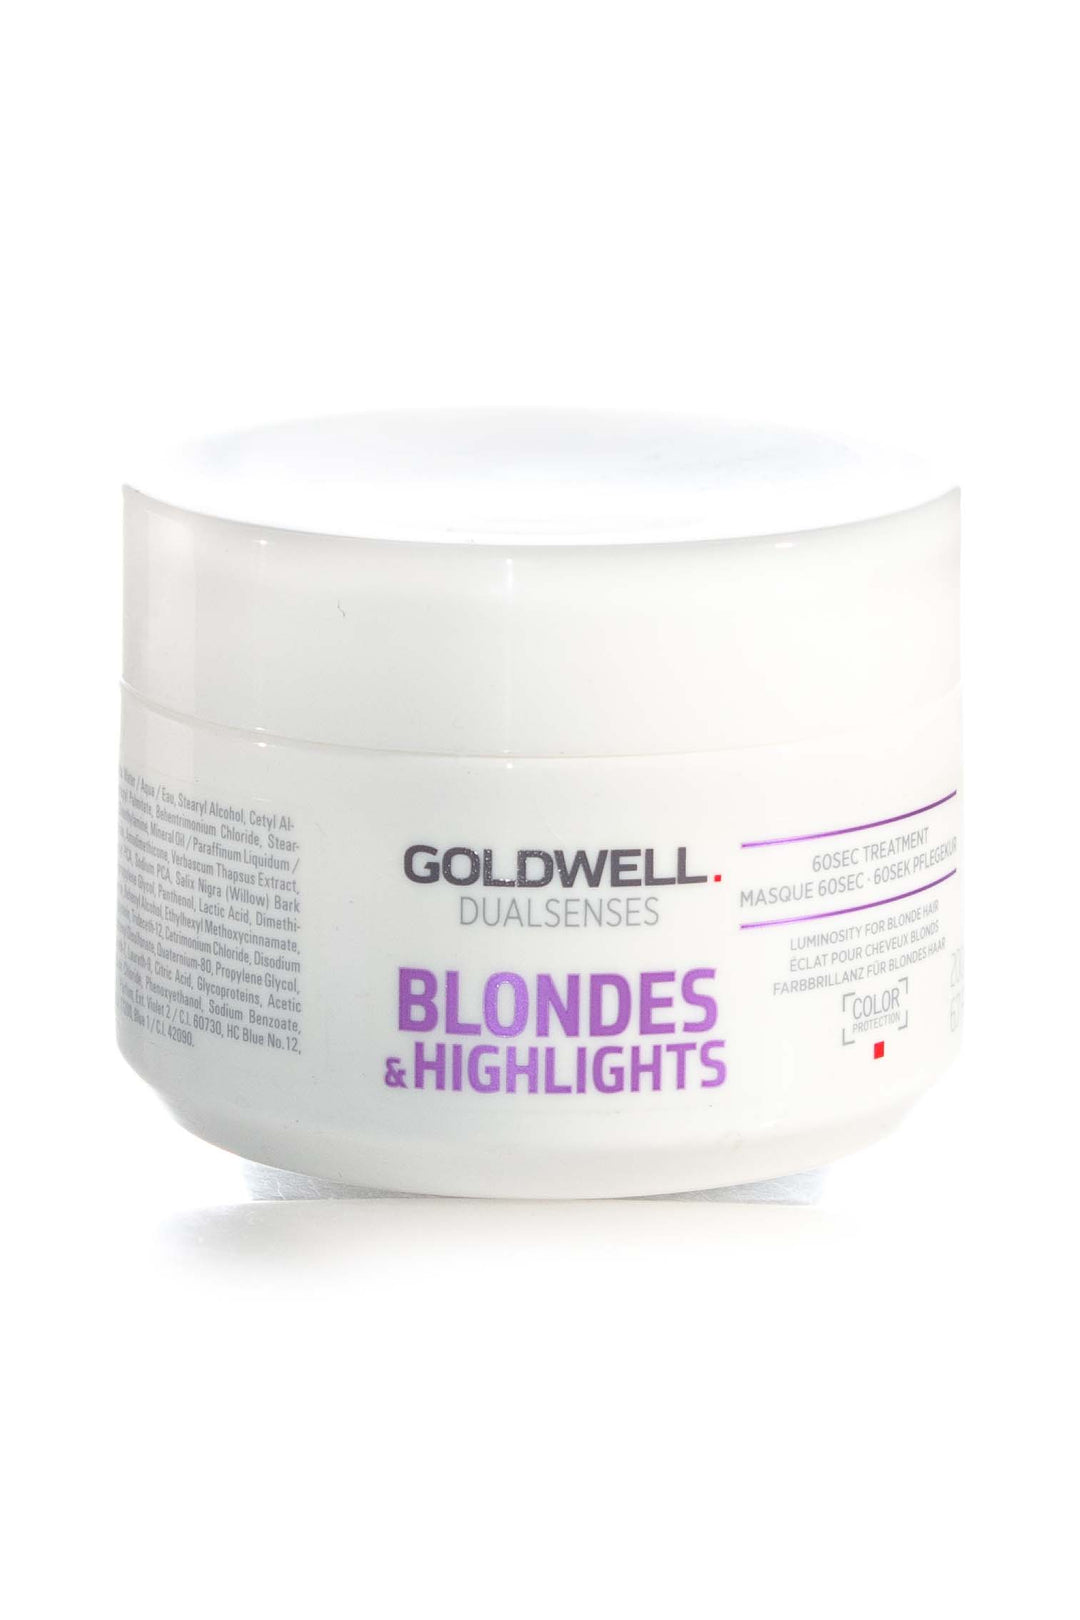 Goldwell Dual Senses Blondes & Highlights 60 Seconds Treatment